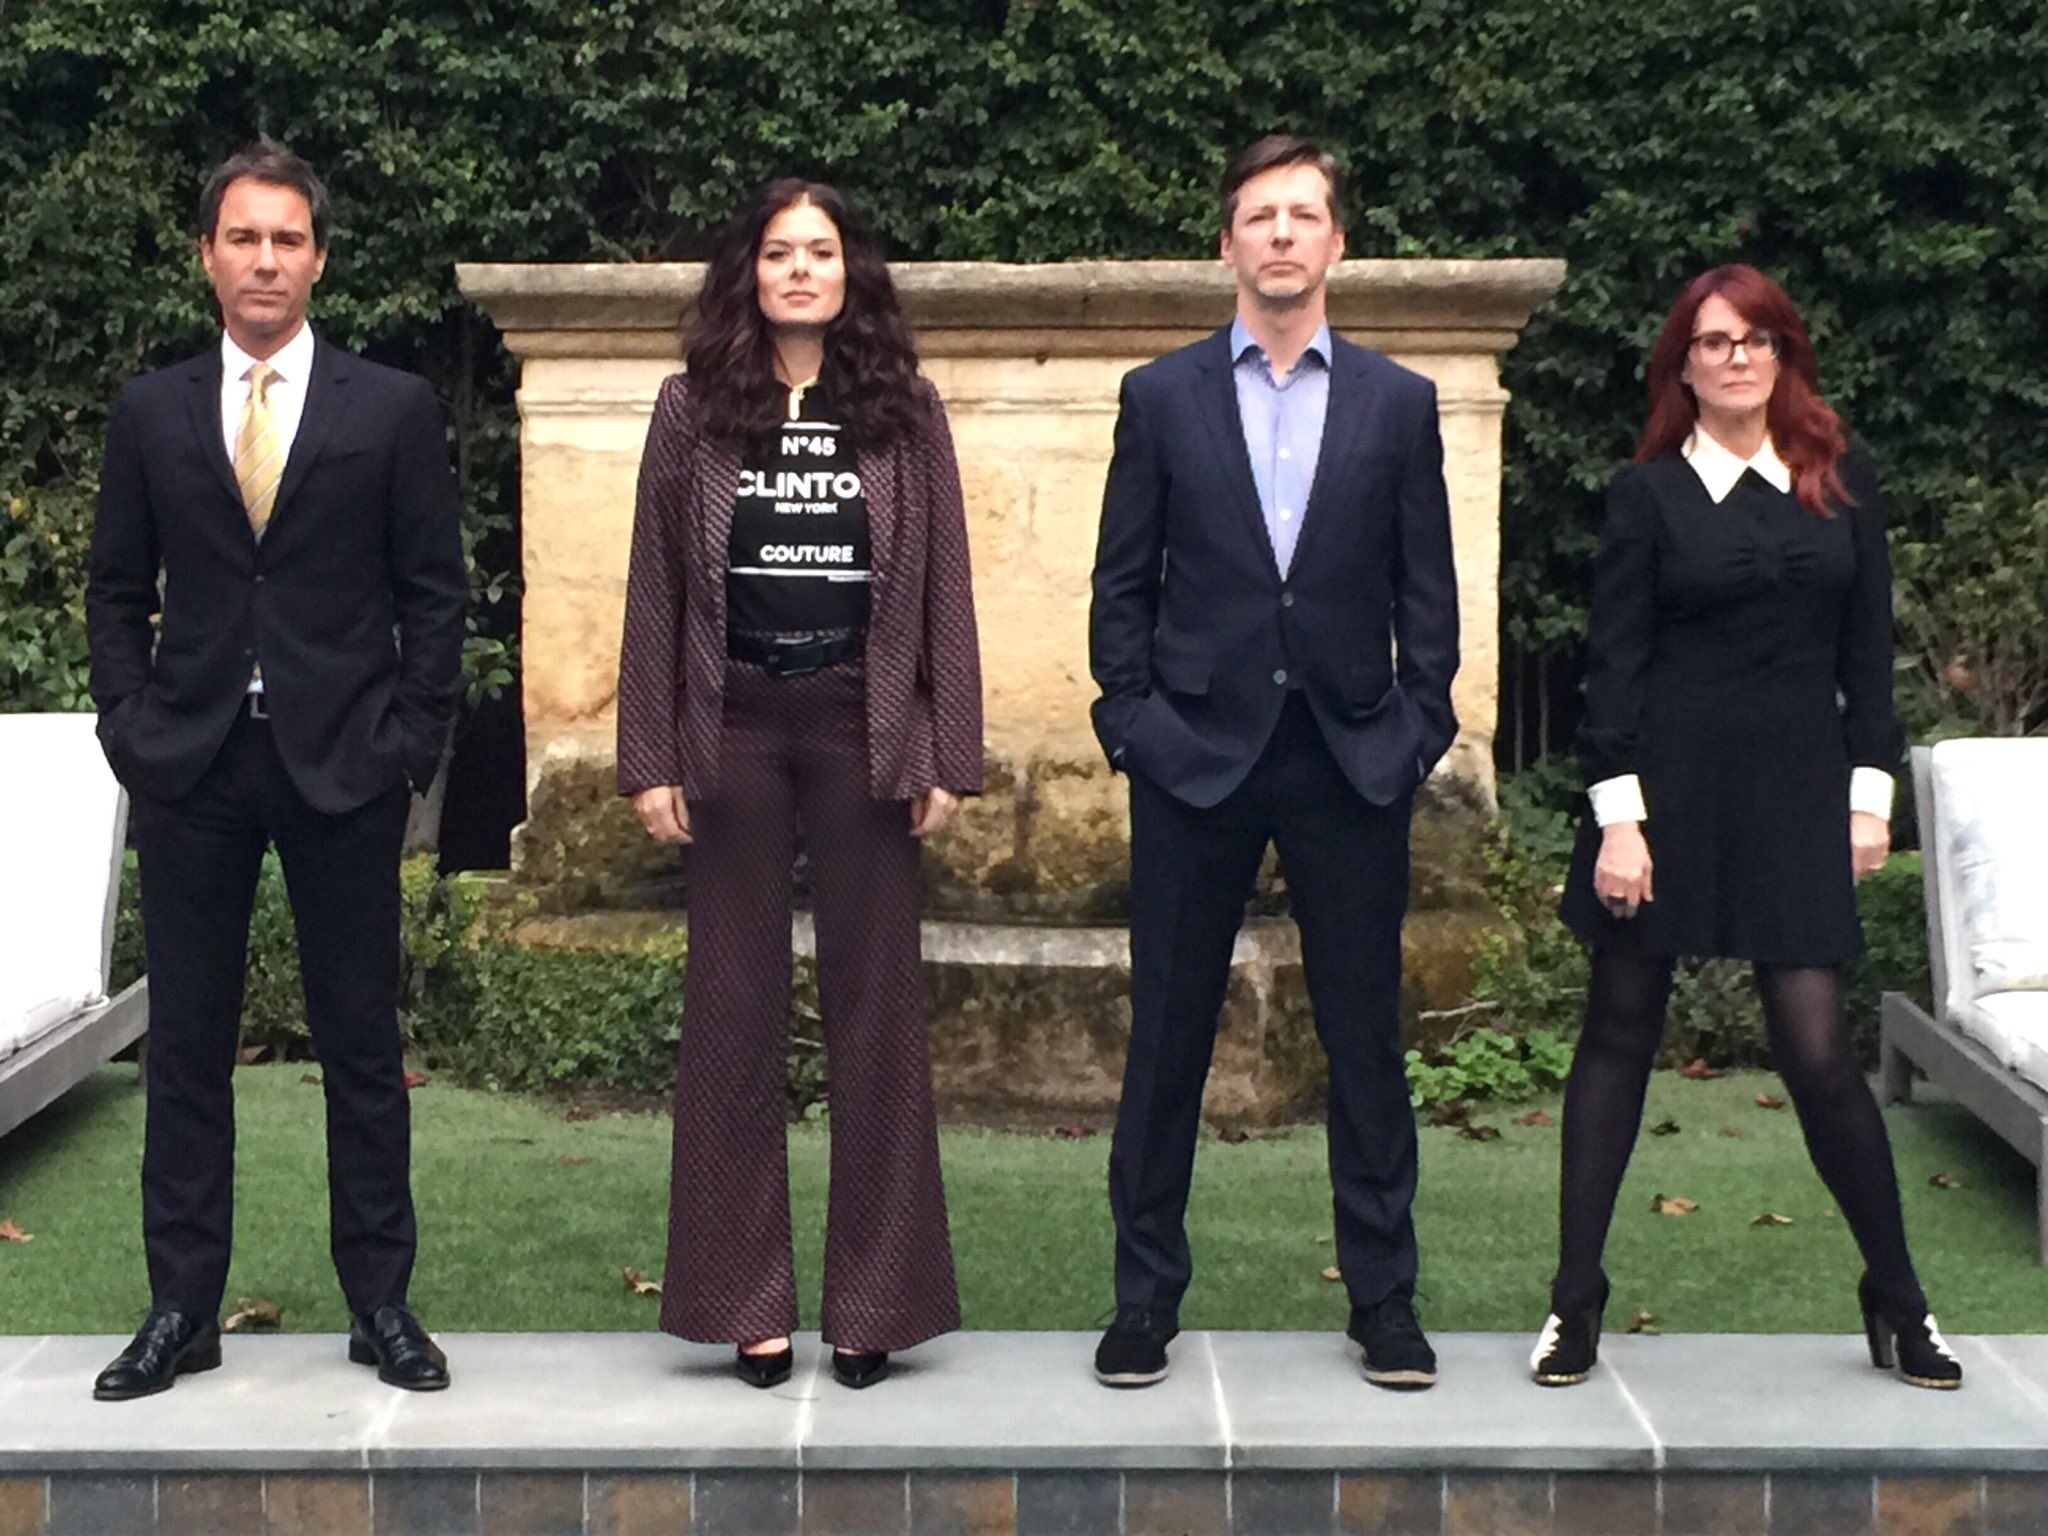 Will and Grace cast reunites again to perform pro-Hillary musical number